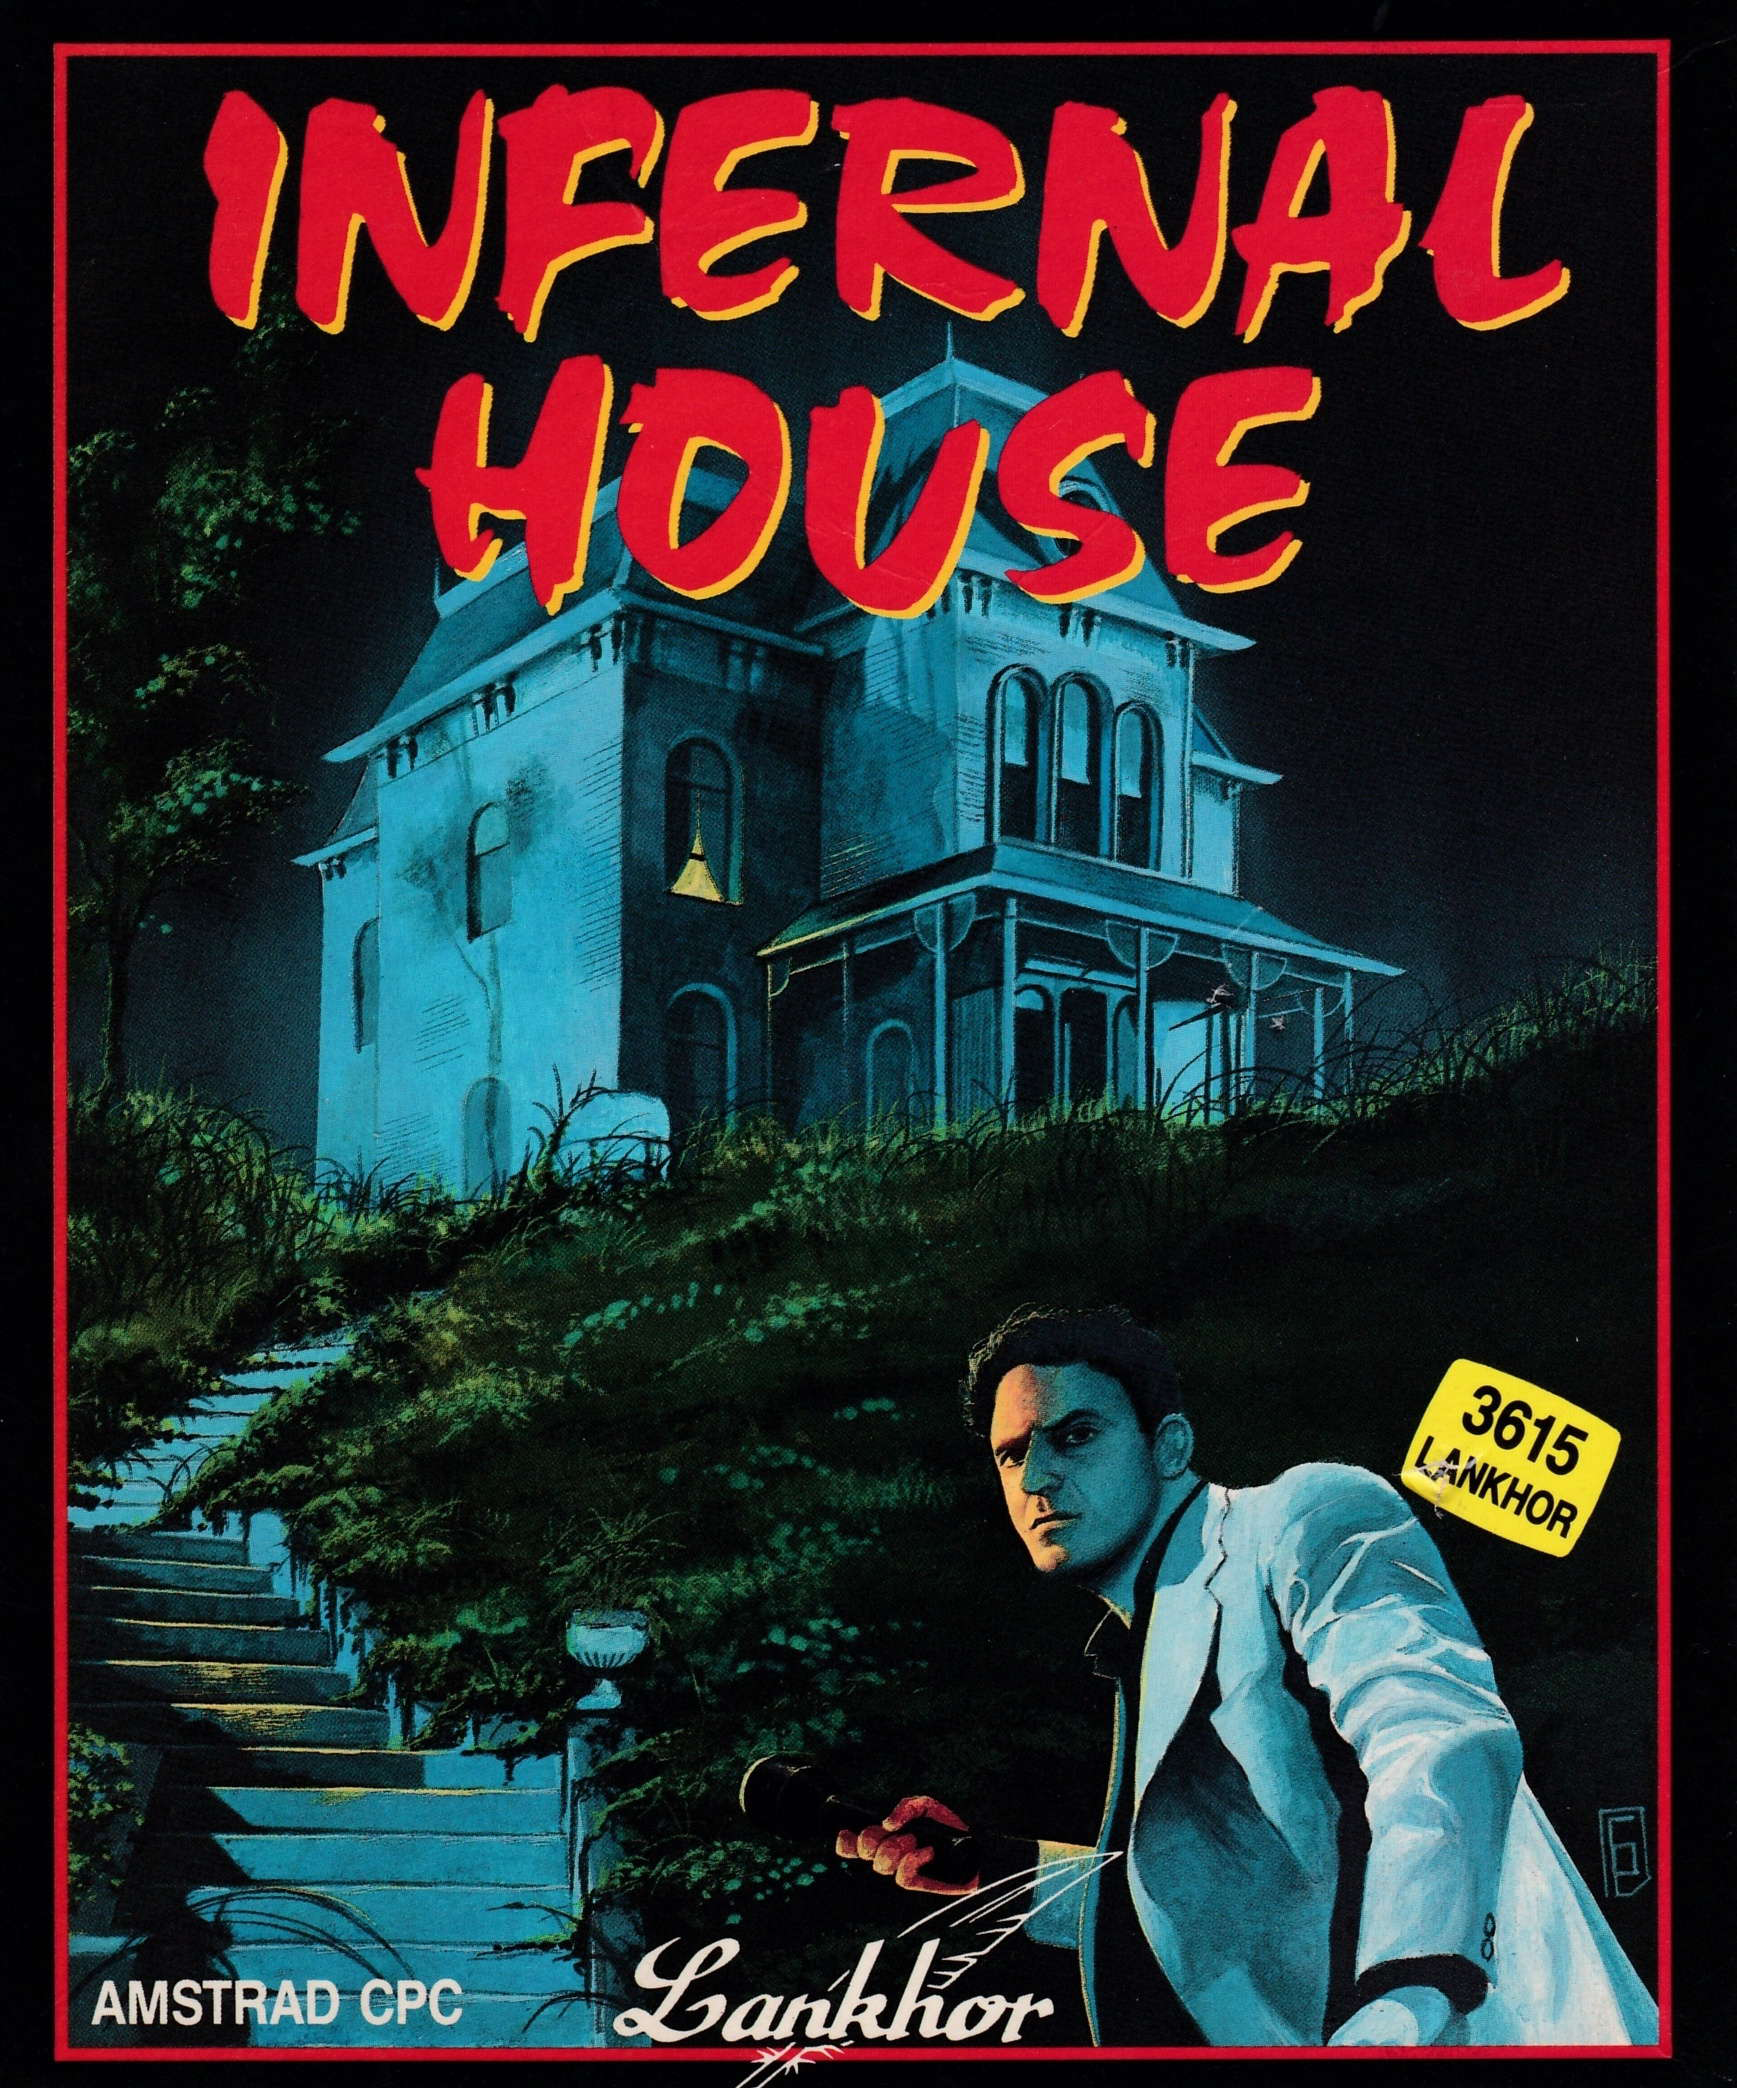 cover of the Amstrad CPC game Infernal House  by GameBase CPC